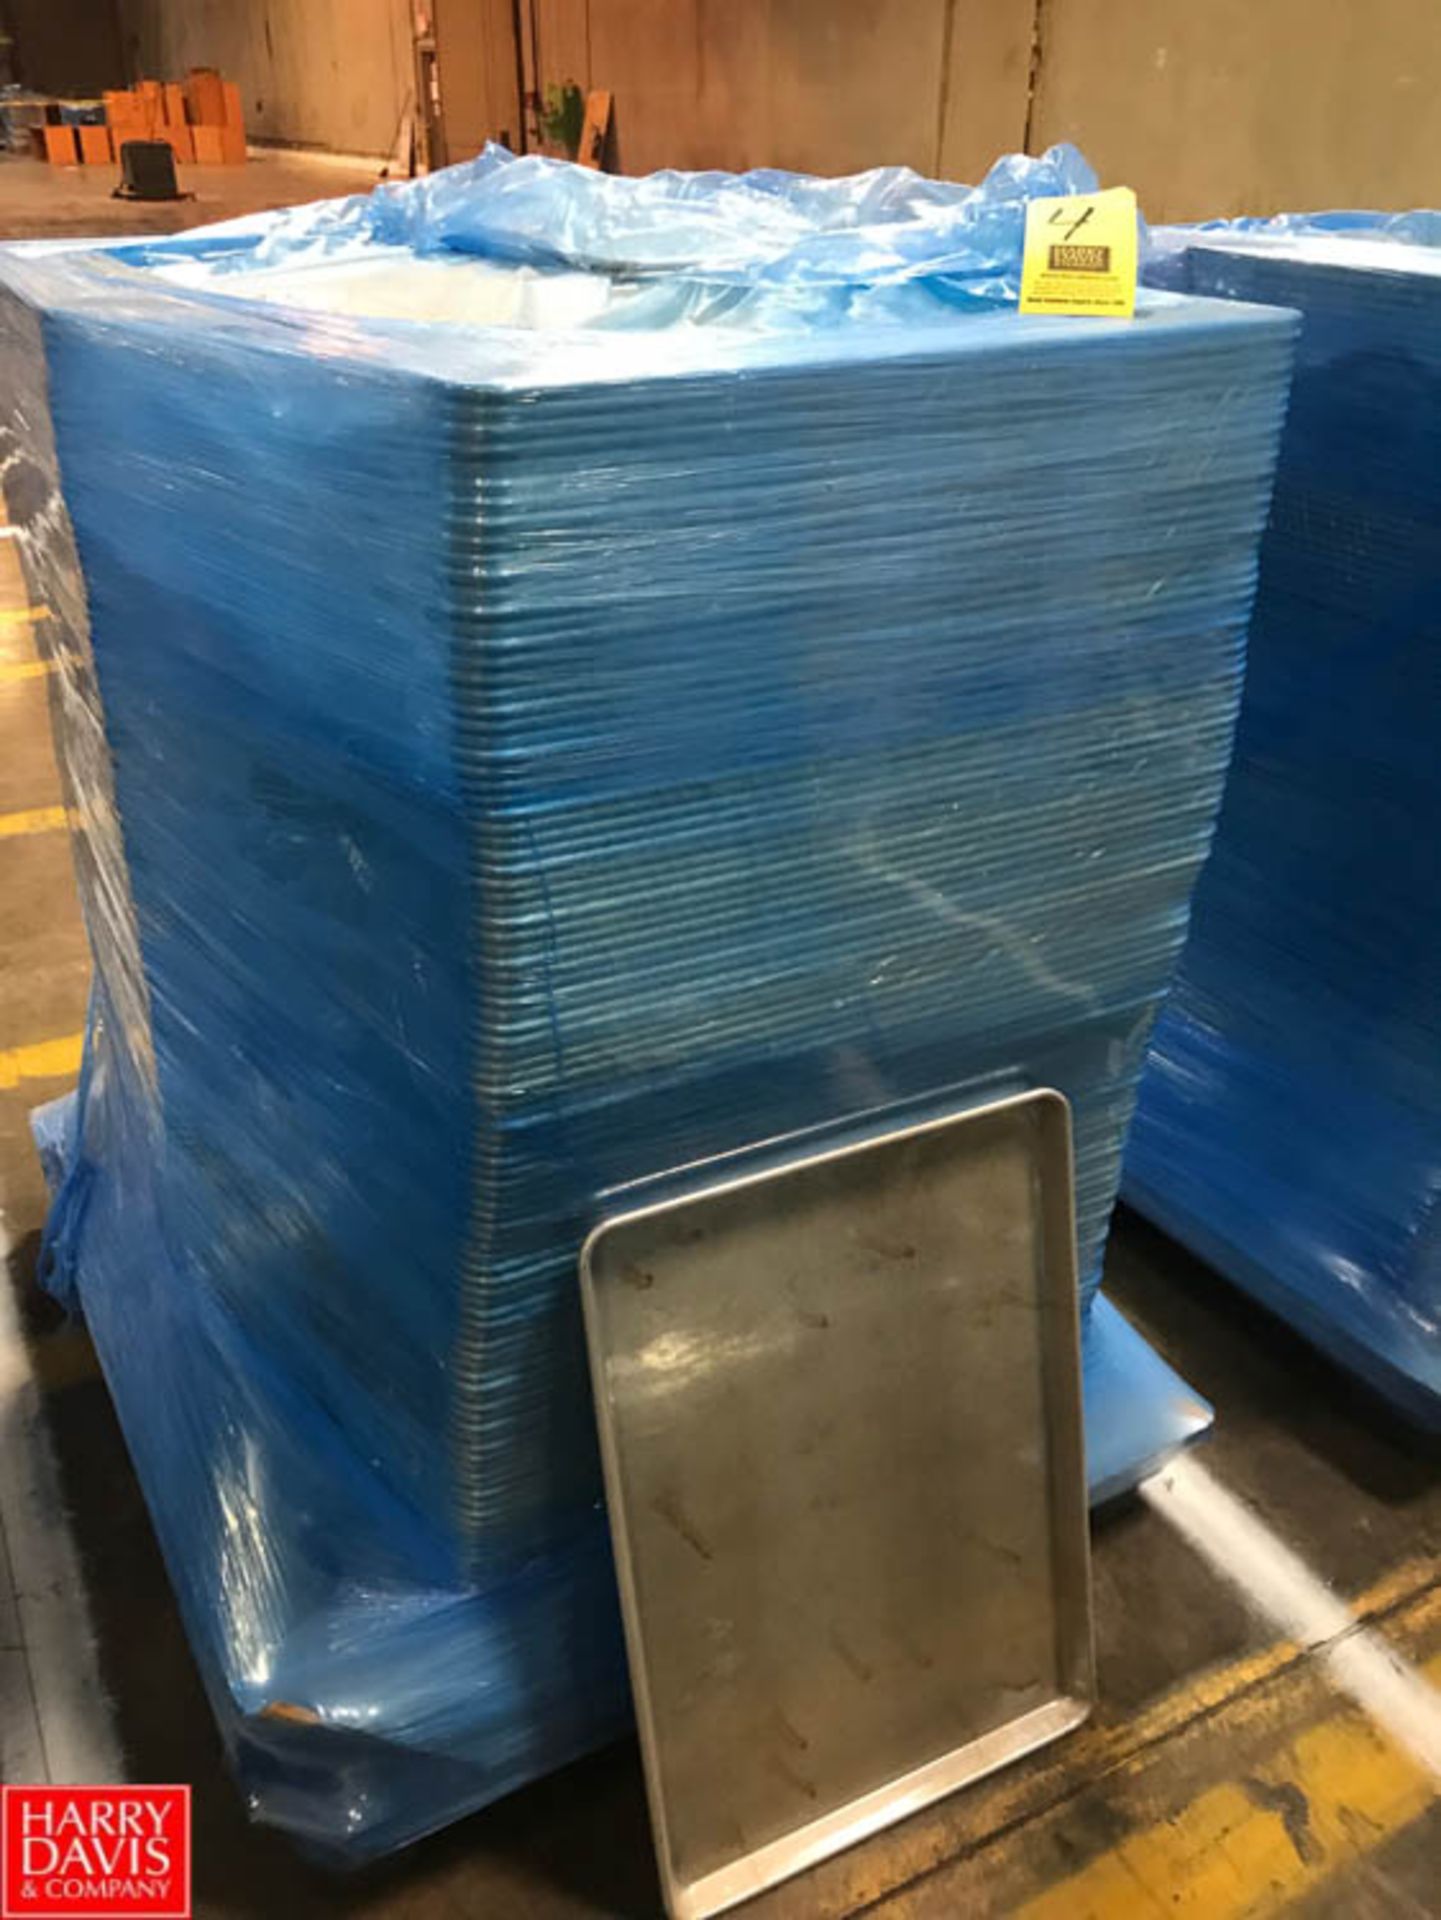 NEW American Pan Aluminum Sheet Pans , 17.75" x 26.75" Rigging Fee: 30, PLEASE NOTE: Your bids are